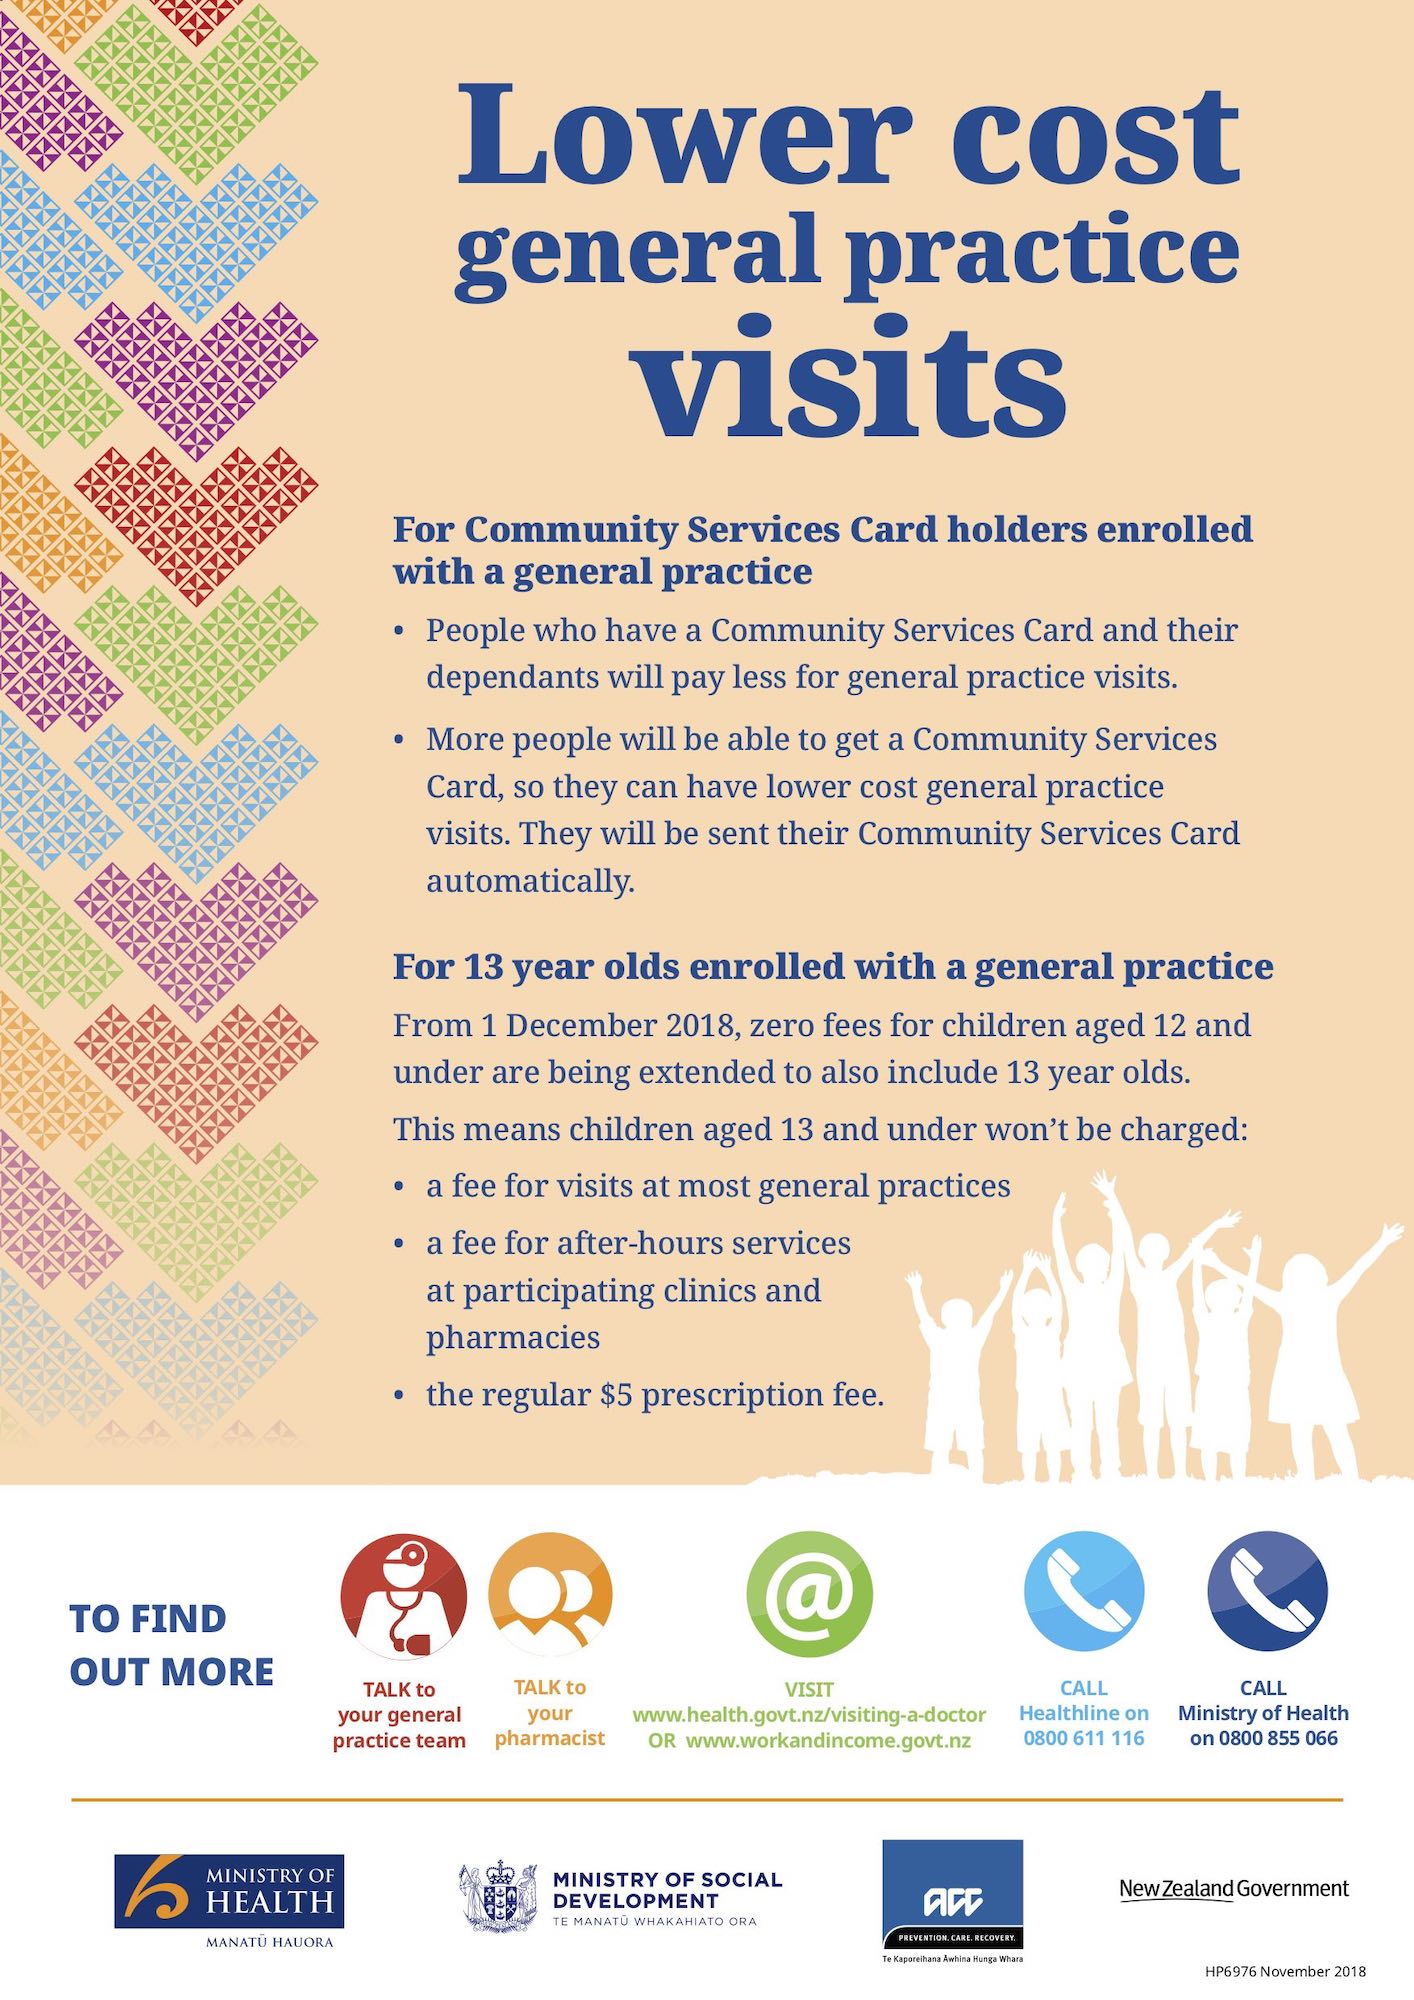 Home Under 14s Lower Cost Visits Poster